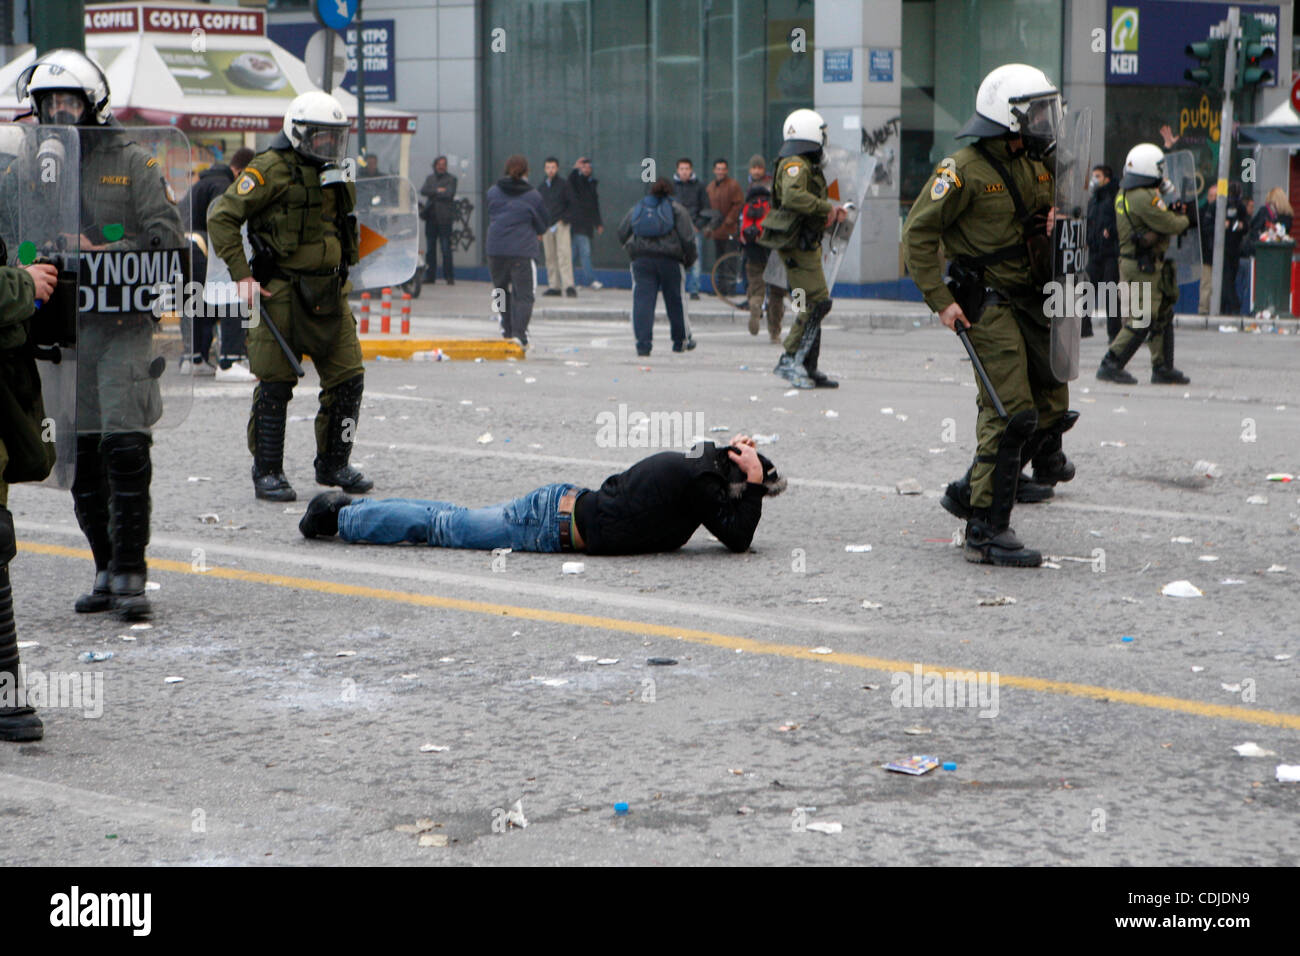 Feb. 23, 2011 - Protesters clash with the riot police outside of the Greek Parliament. Police throwed tear gas and protesters fire bombs. Thousands of people protest against government's planned austerity measures. (Credit Image: © Aristidis Vafeiadakis/ZUMAPRESS.com) Stock Photo